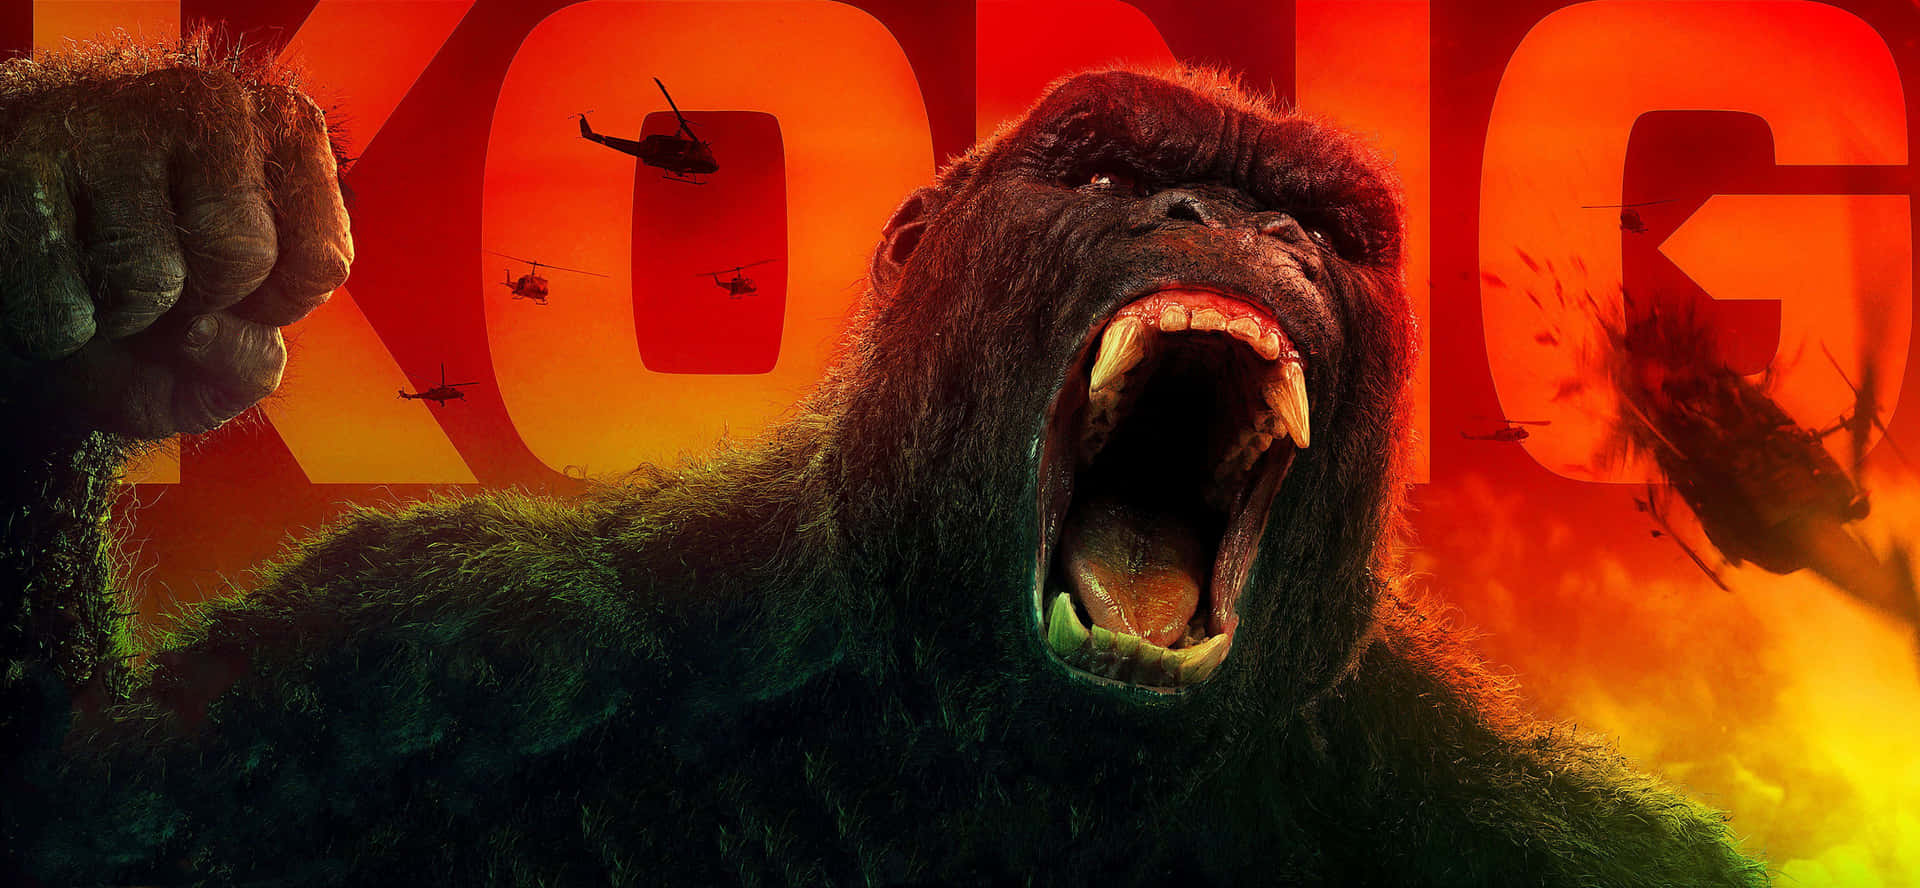 An Iconic Moment - The Legendary King Kong